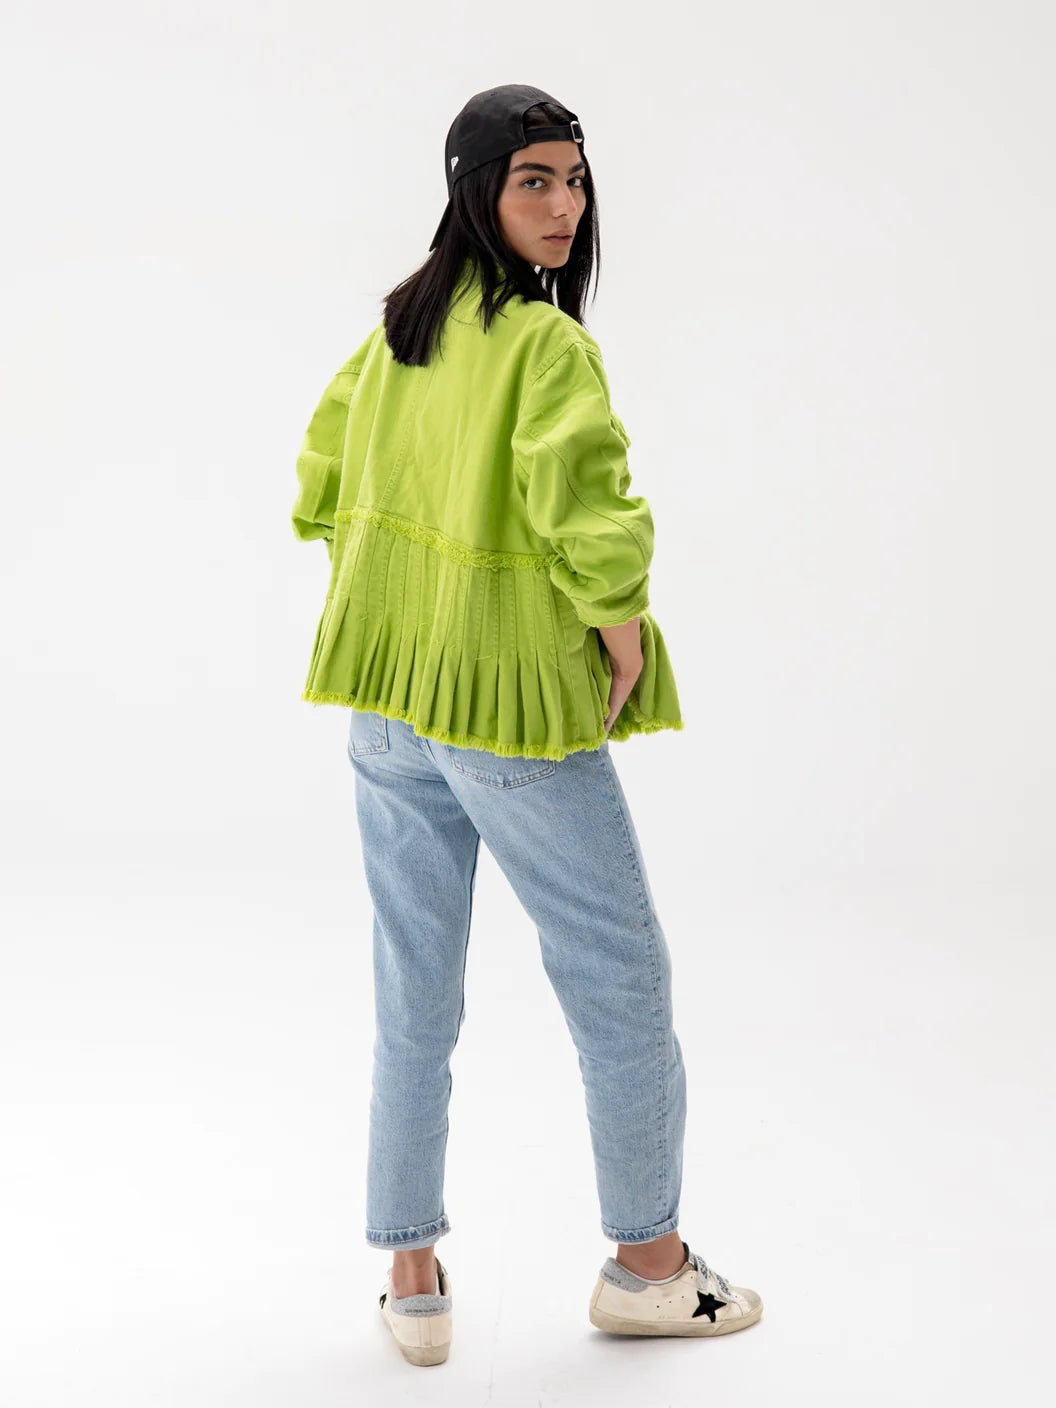 The pleated denim jacket in apple green